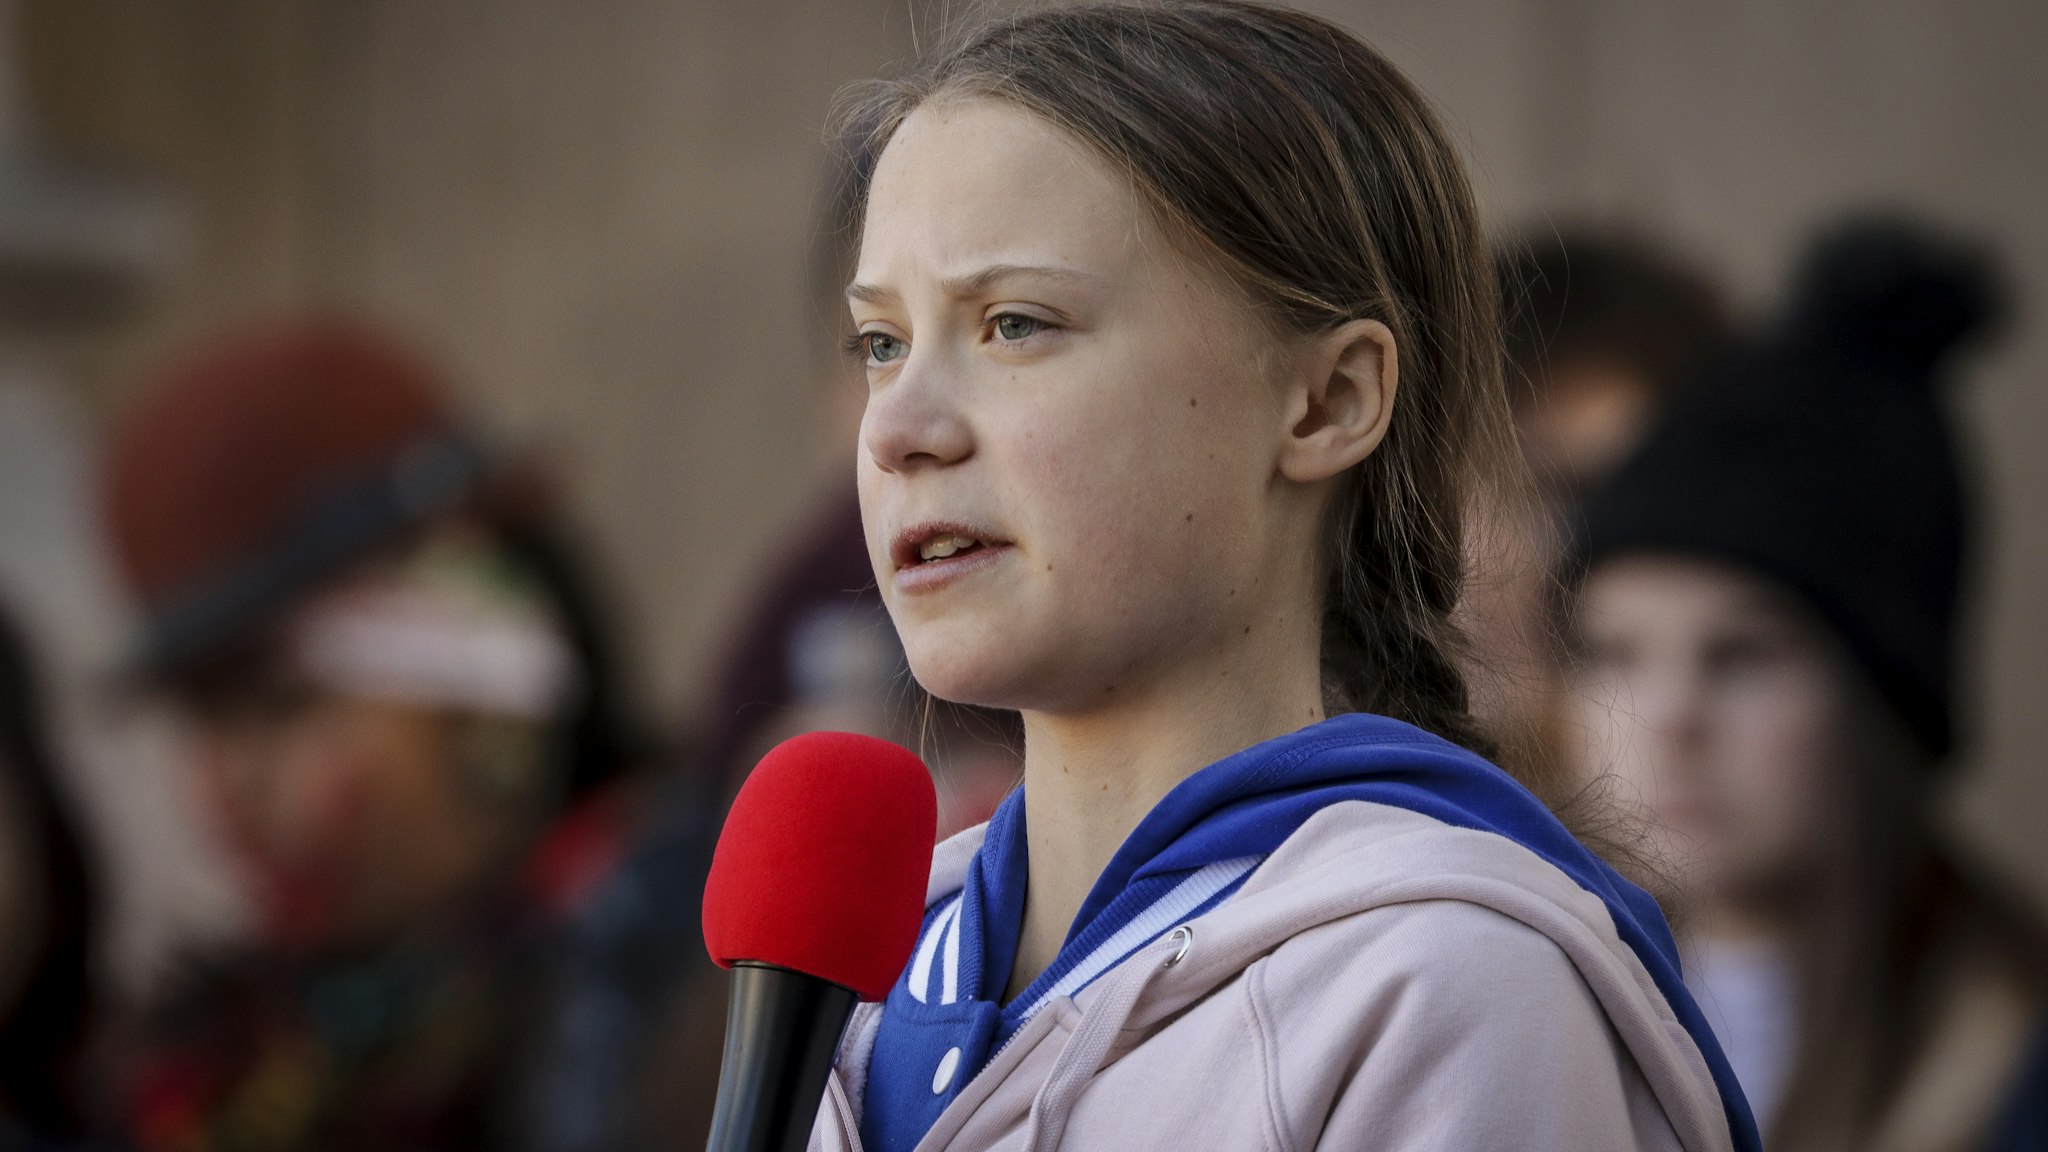 wedish teen activist Greta Thunberg speaks at the Fridays For Future Denver Climate Strike on October 11, 2019 at Civic Center Park in Denver, Colorado. Thousands of protesters attended the event which was sparked by Thunberg's #FridaysForFuture movement. (Photo by Marc Piscotty/Getty Images)